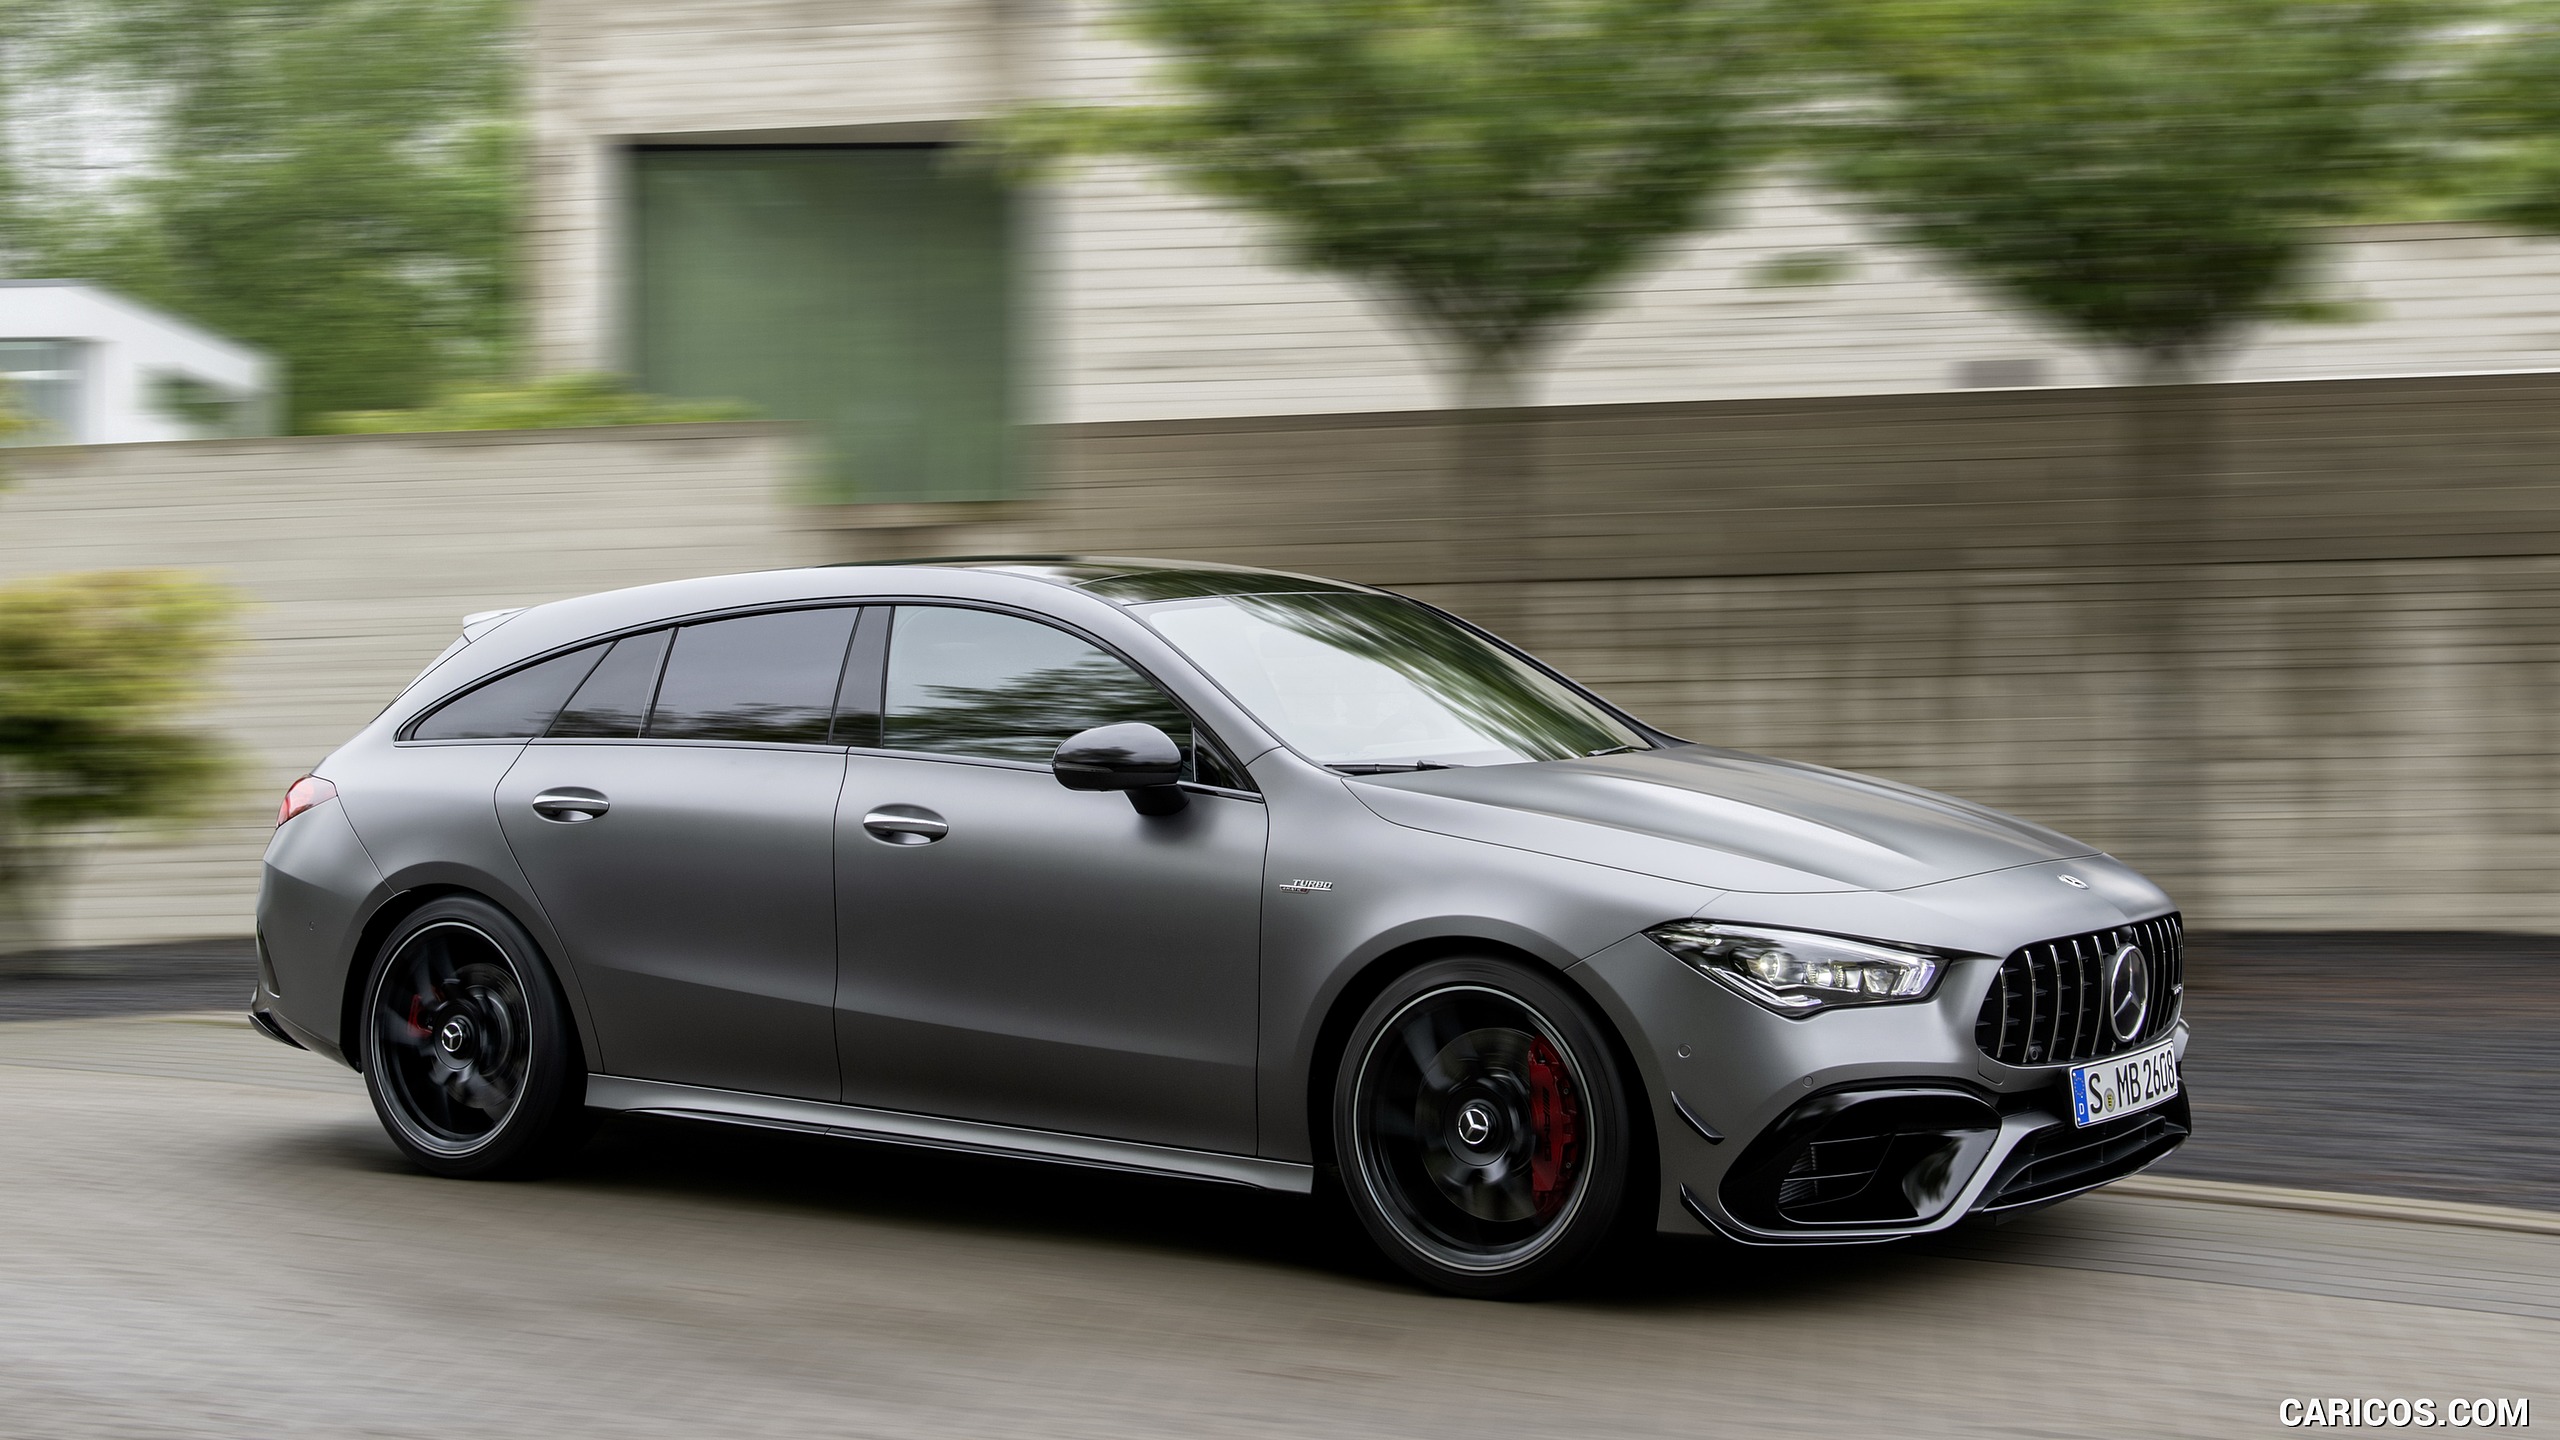 2020 Mercedes-AMG CLA 45 S 4MATIC+ Shooting Brake - Front Three-Quarter, #11 of 35